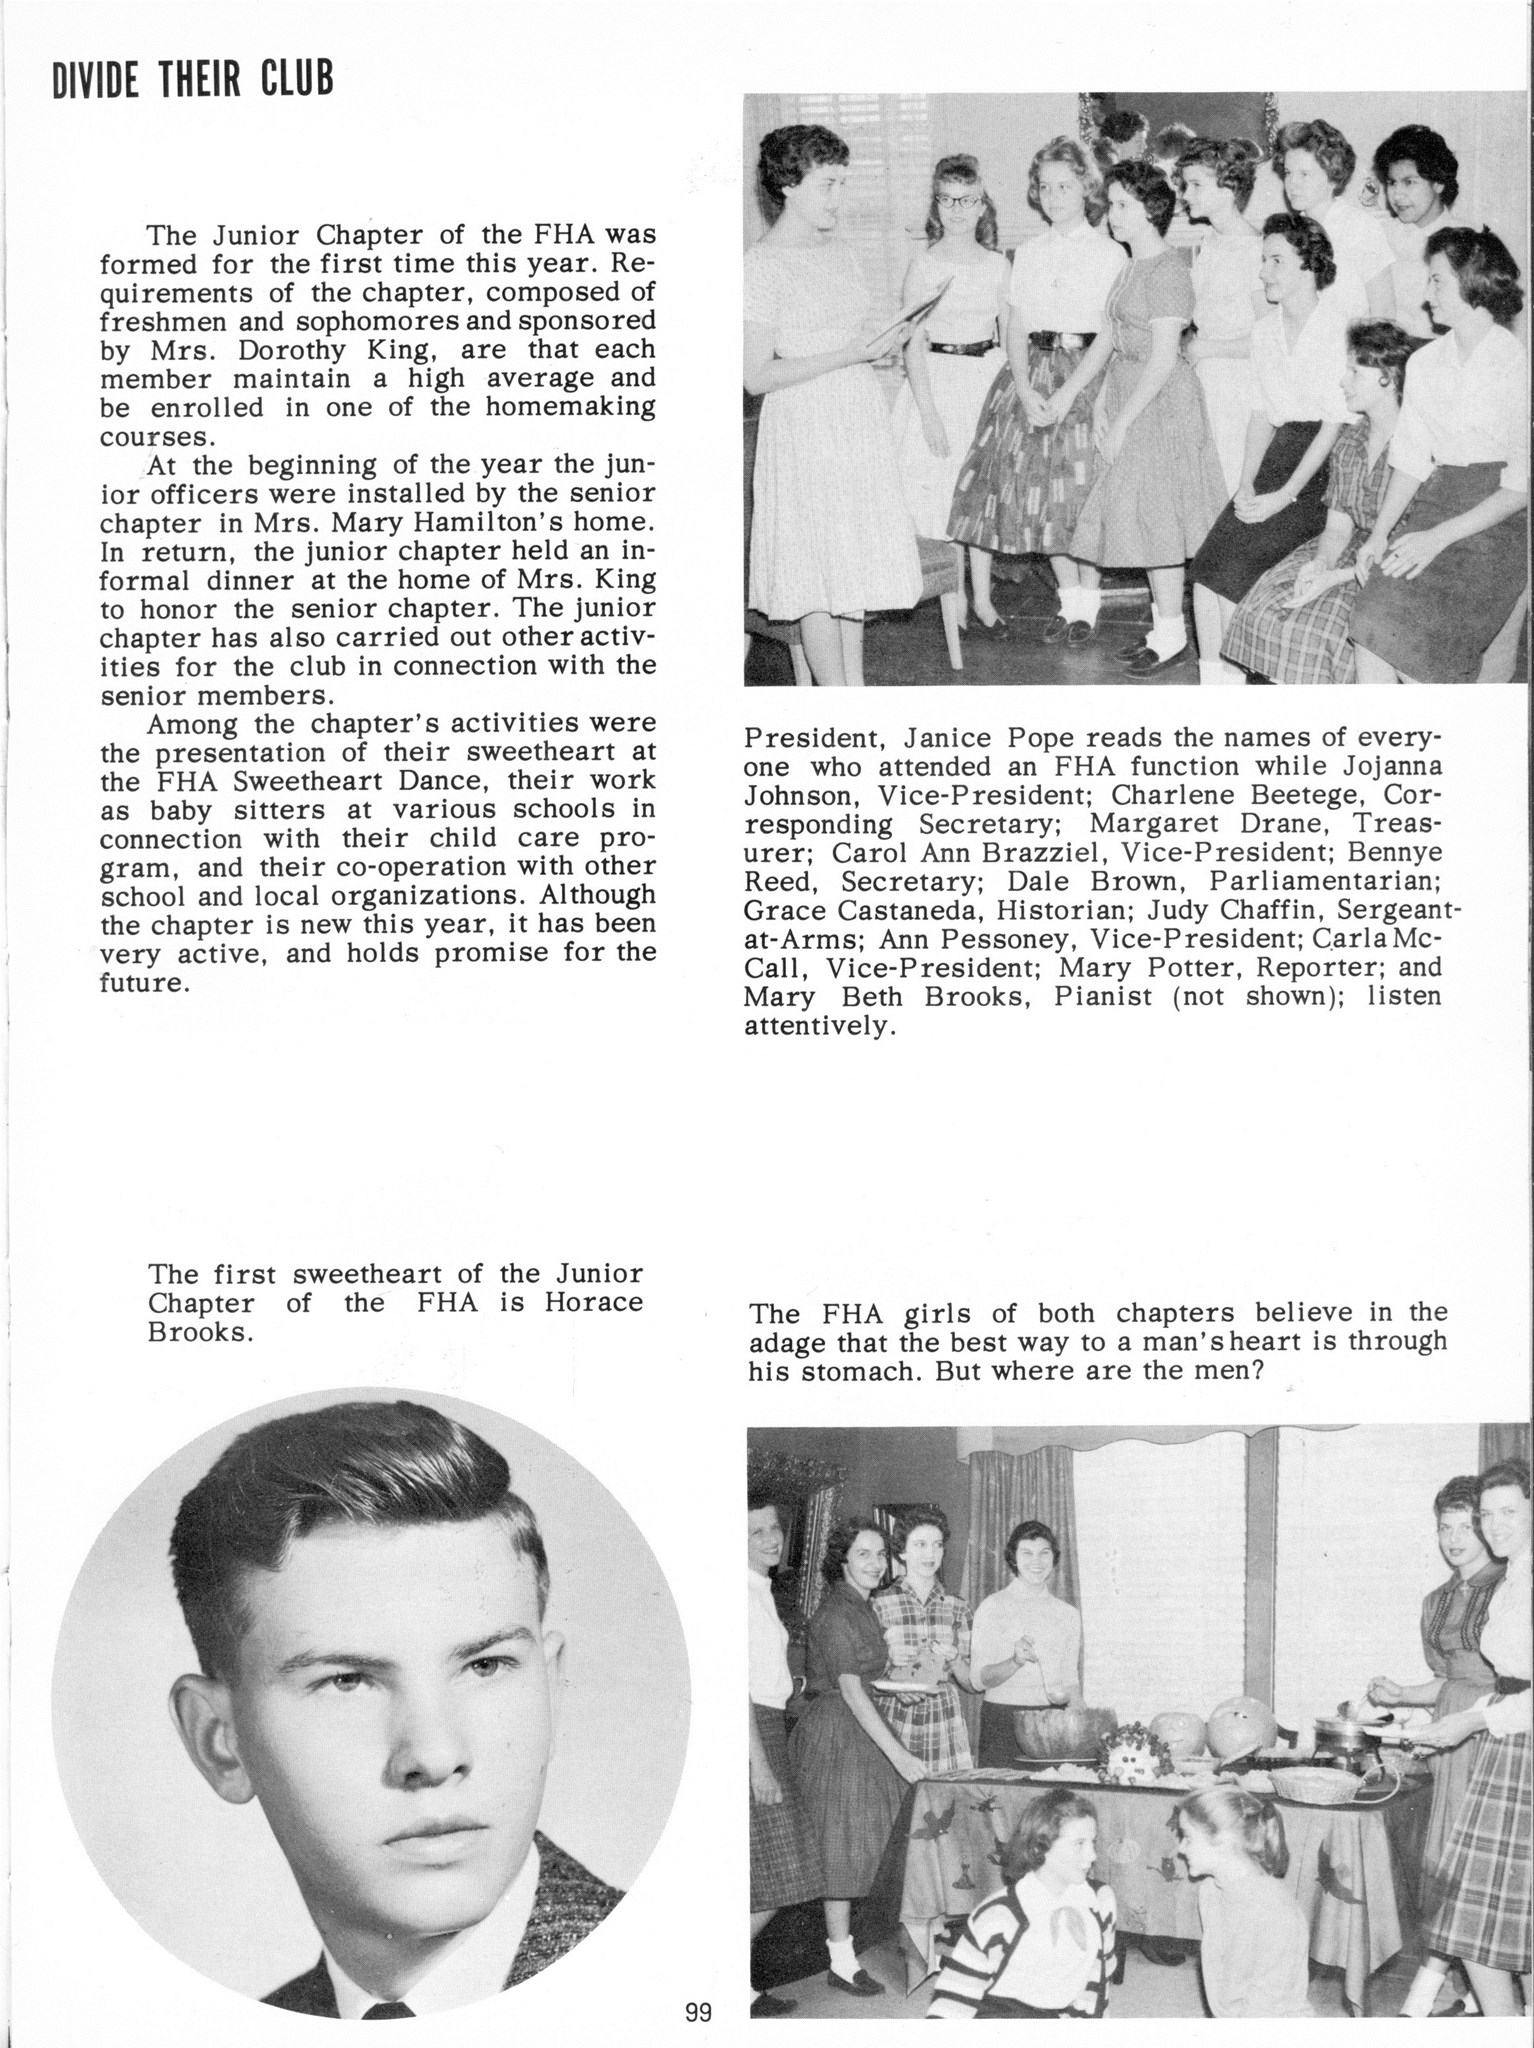 ../../../Images/Large/1960/Arclight-1960-pg0099.jpg